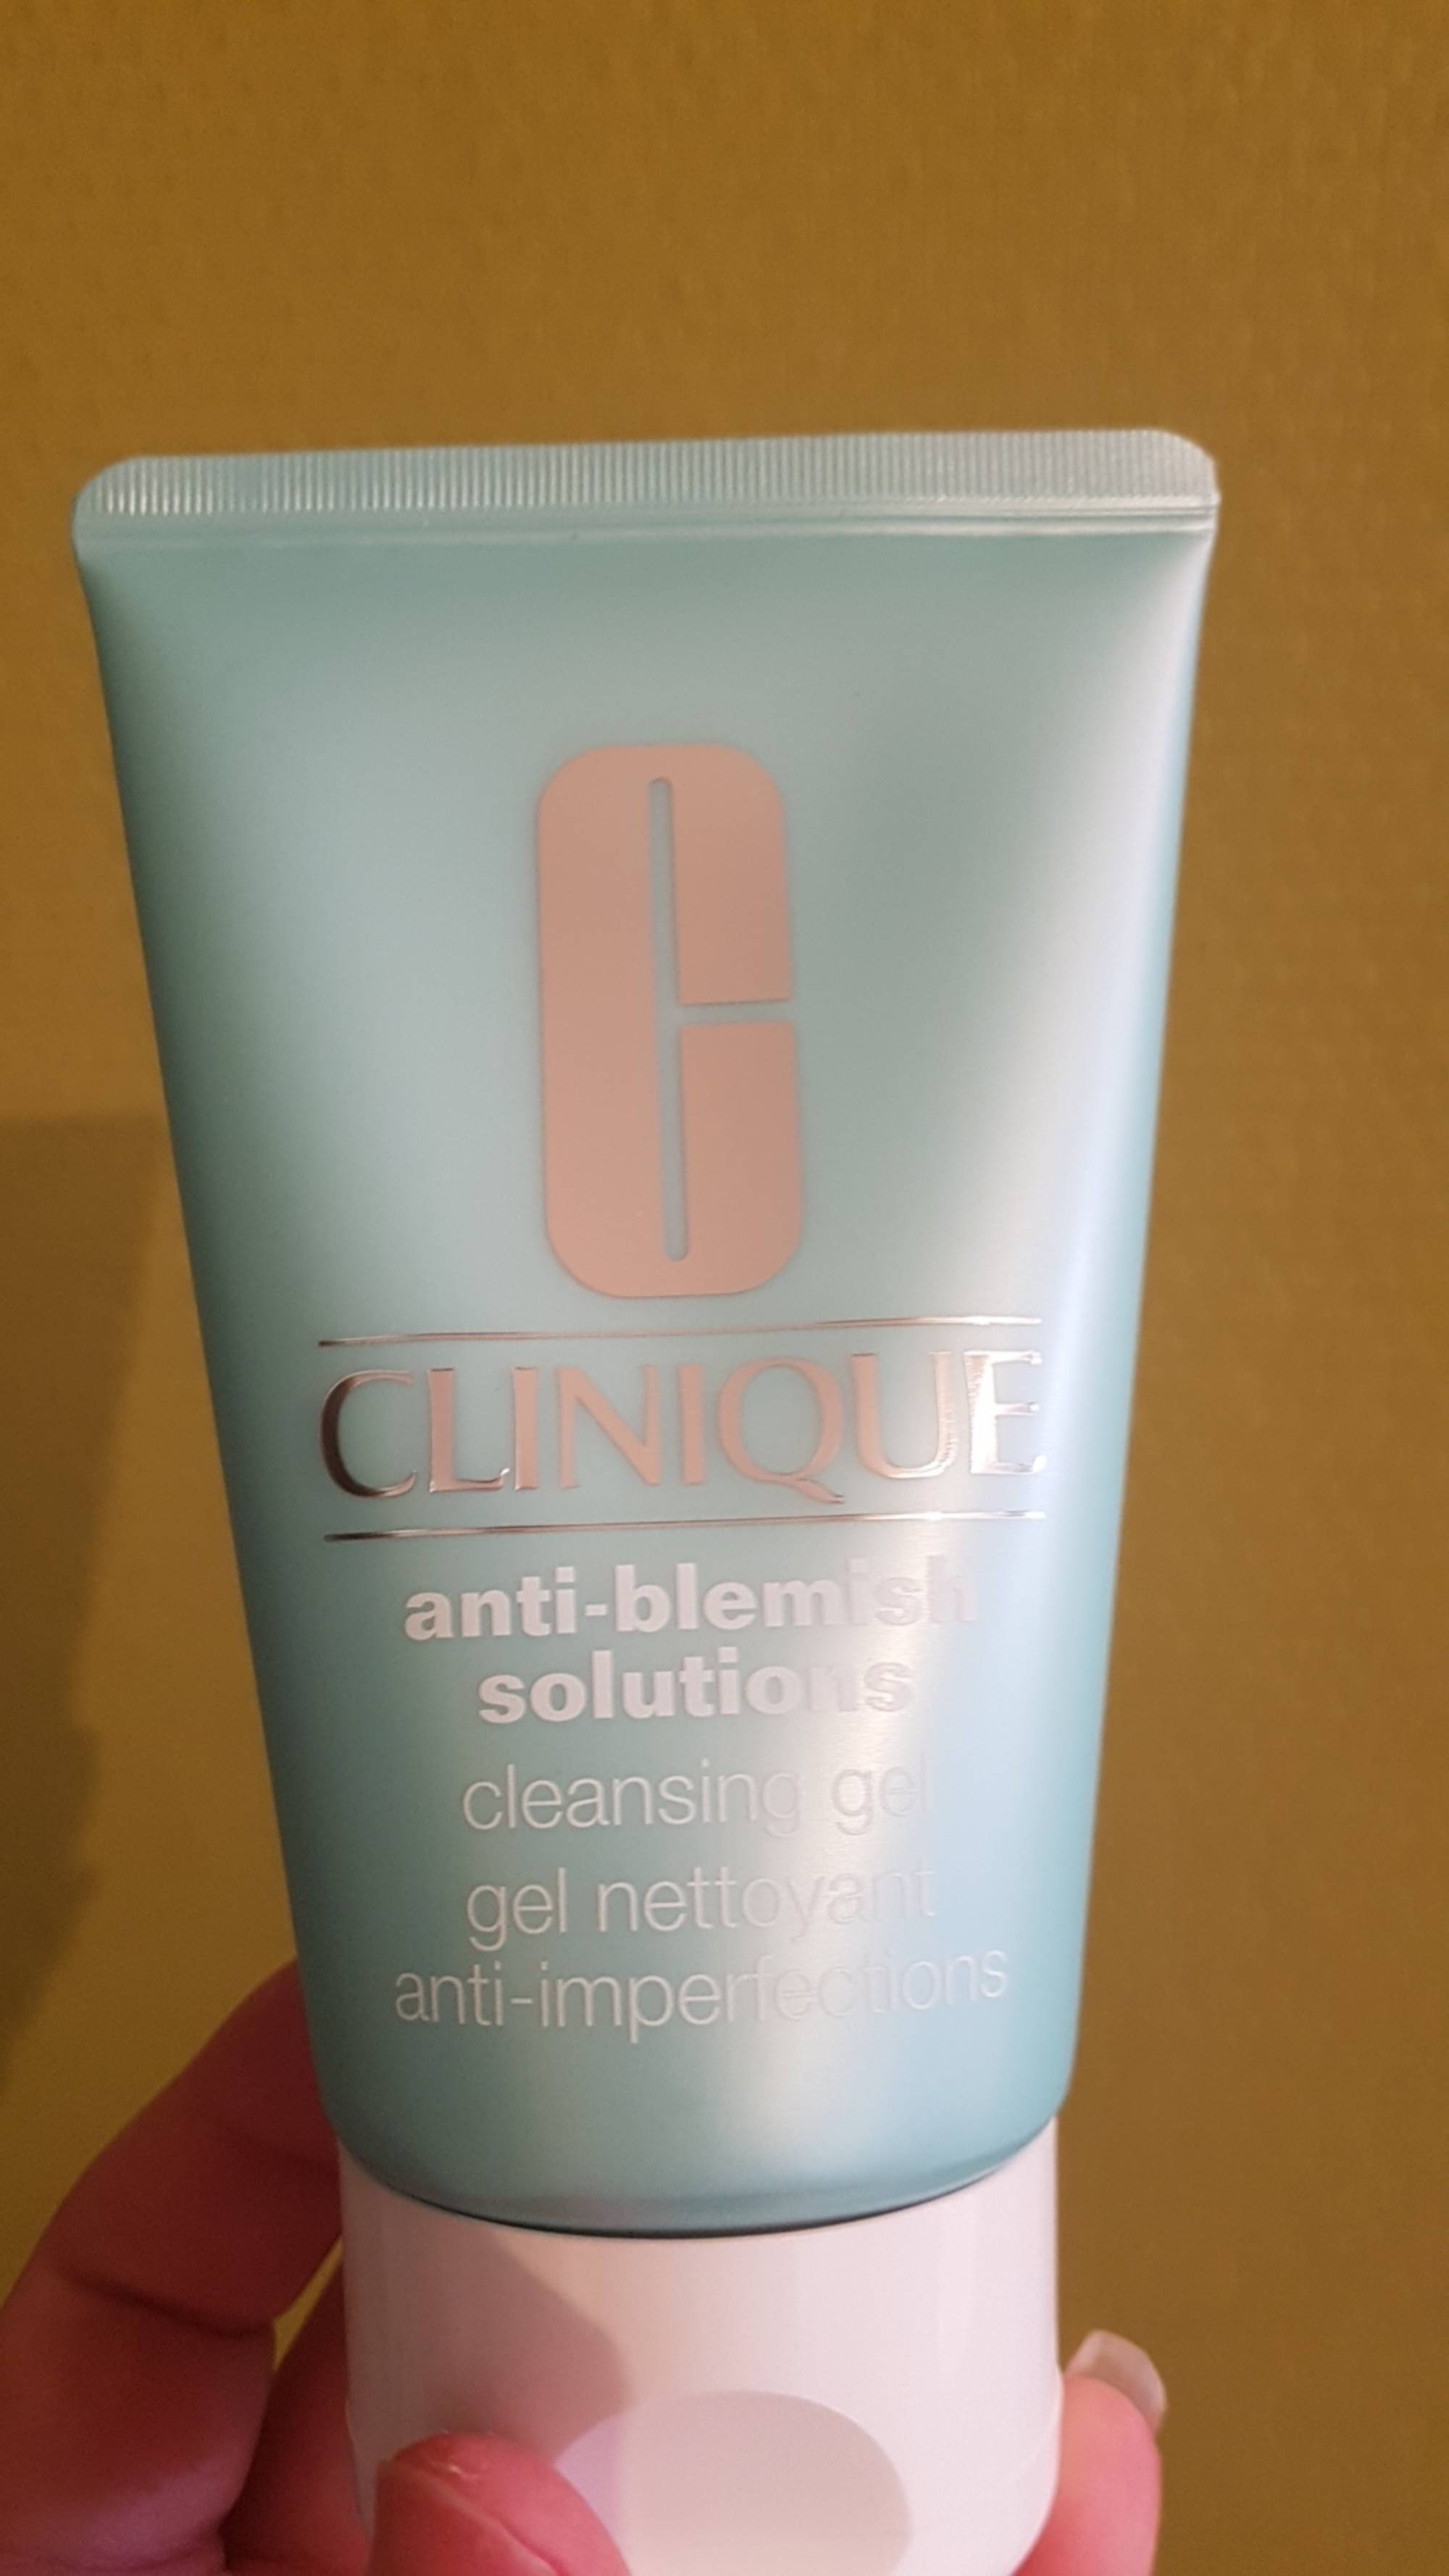 CLINIQUE - Anti-blemish solutions - Gel nettoyant anti-imperfections